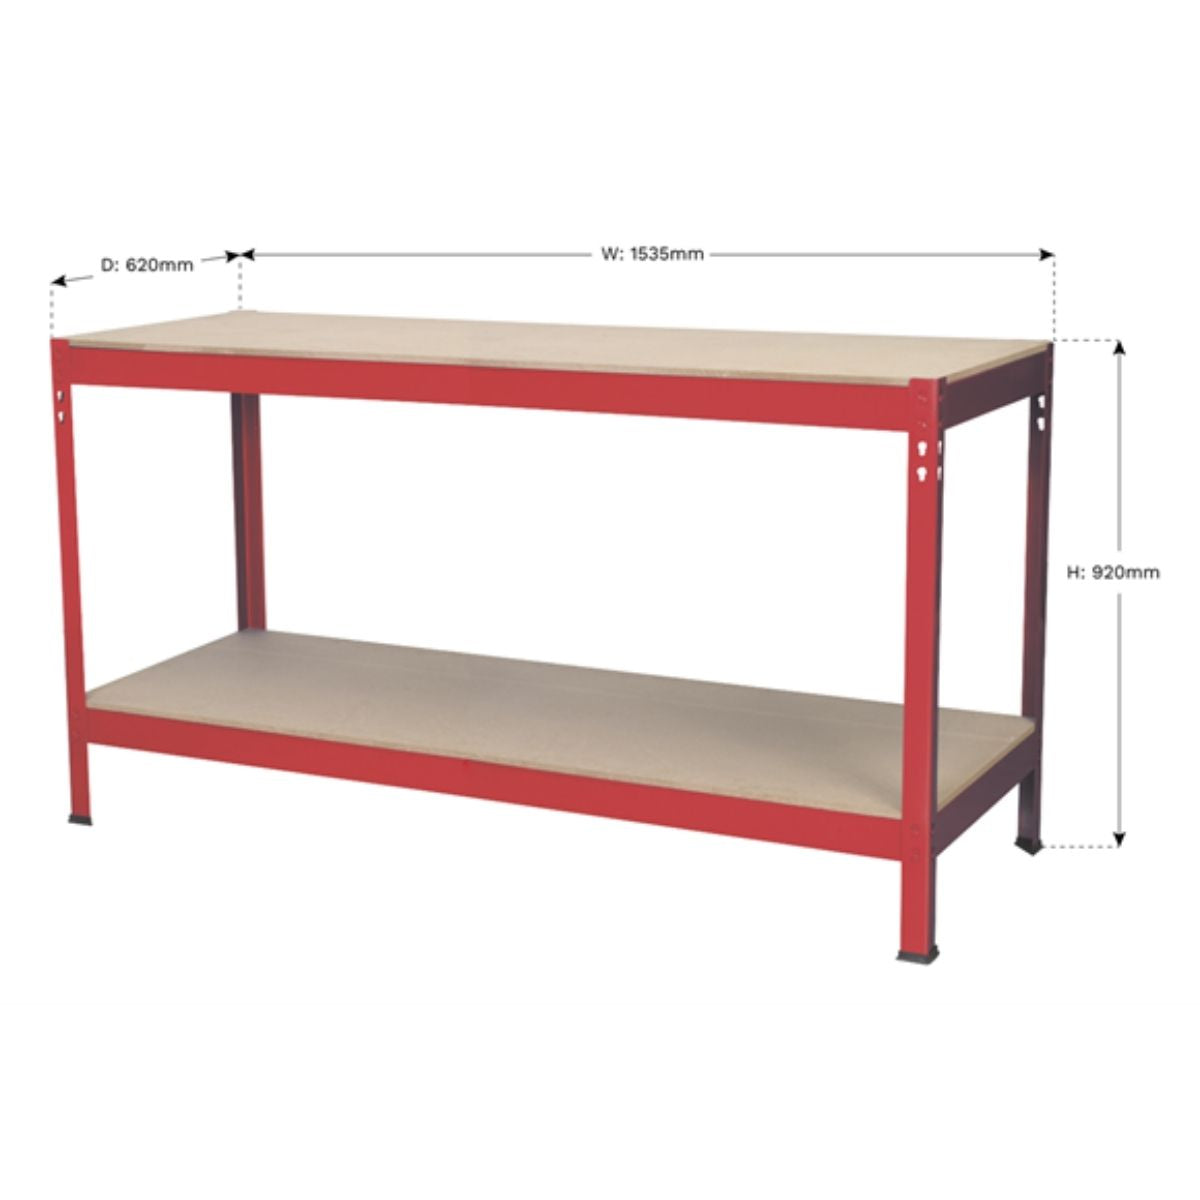 Sealey AP1535 1.53m Steel Workbench with Wooden Top